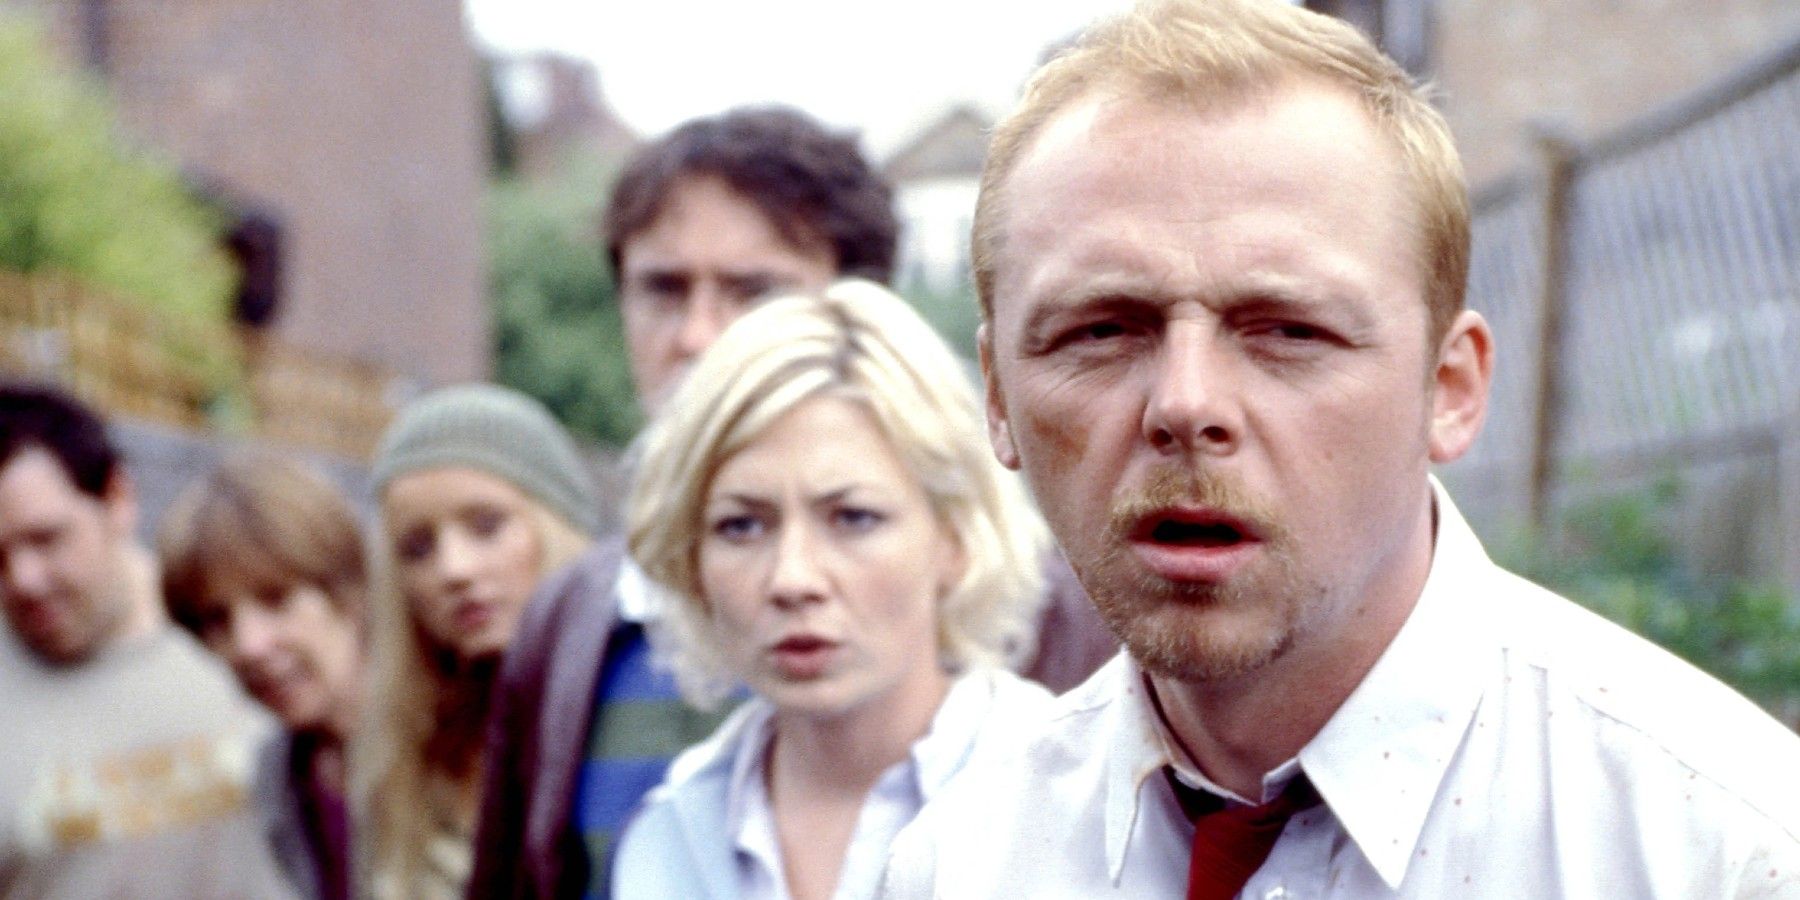 Simon Pegg and the other characters looking scared in Shaun of the Dead